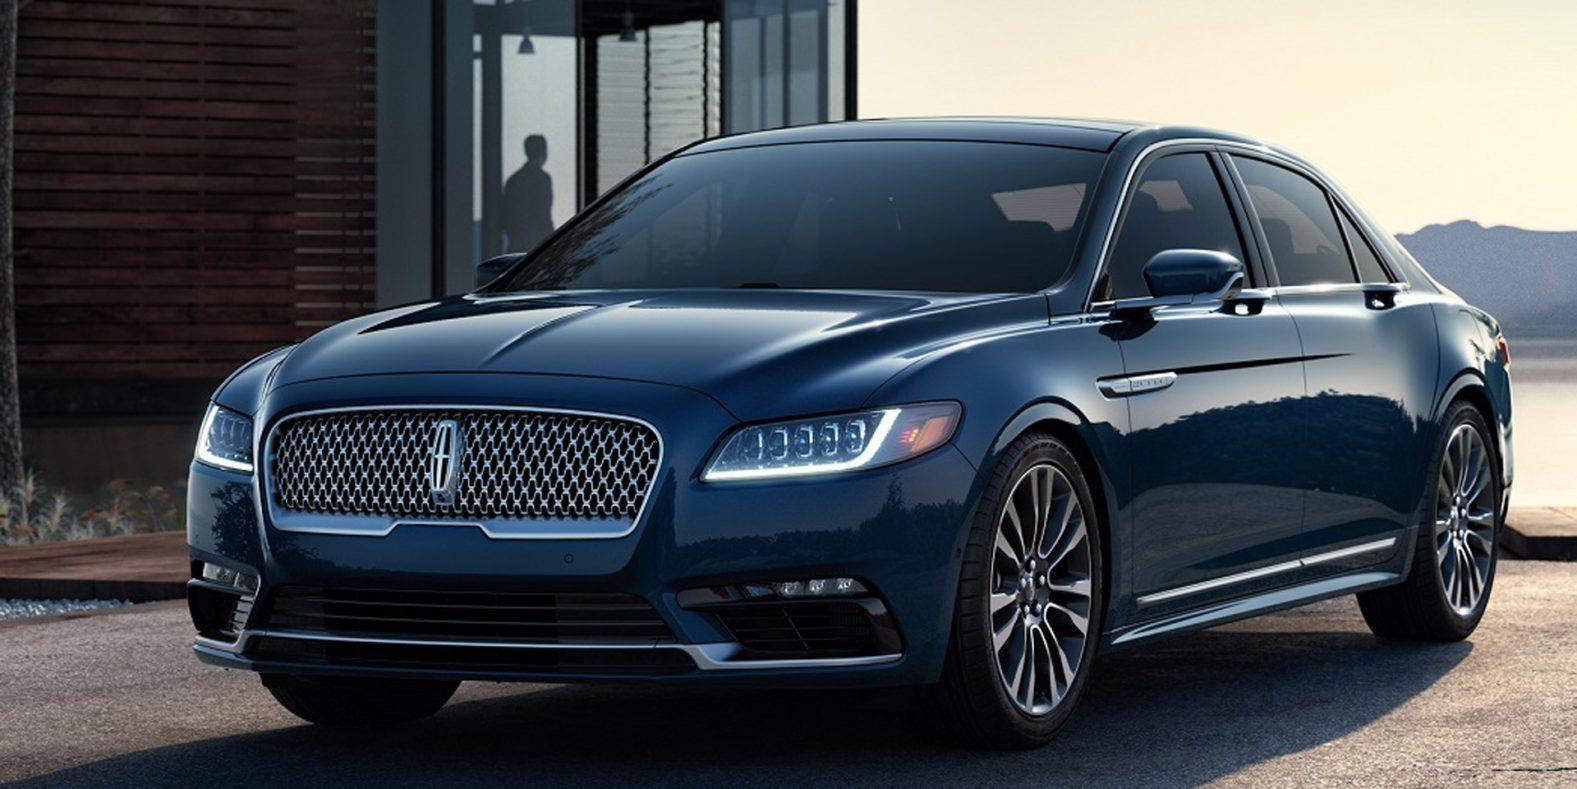 New 2019 Lincoln Continental Side High Resolution Wallpaper